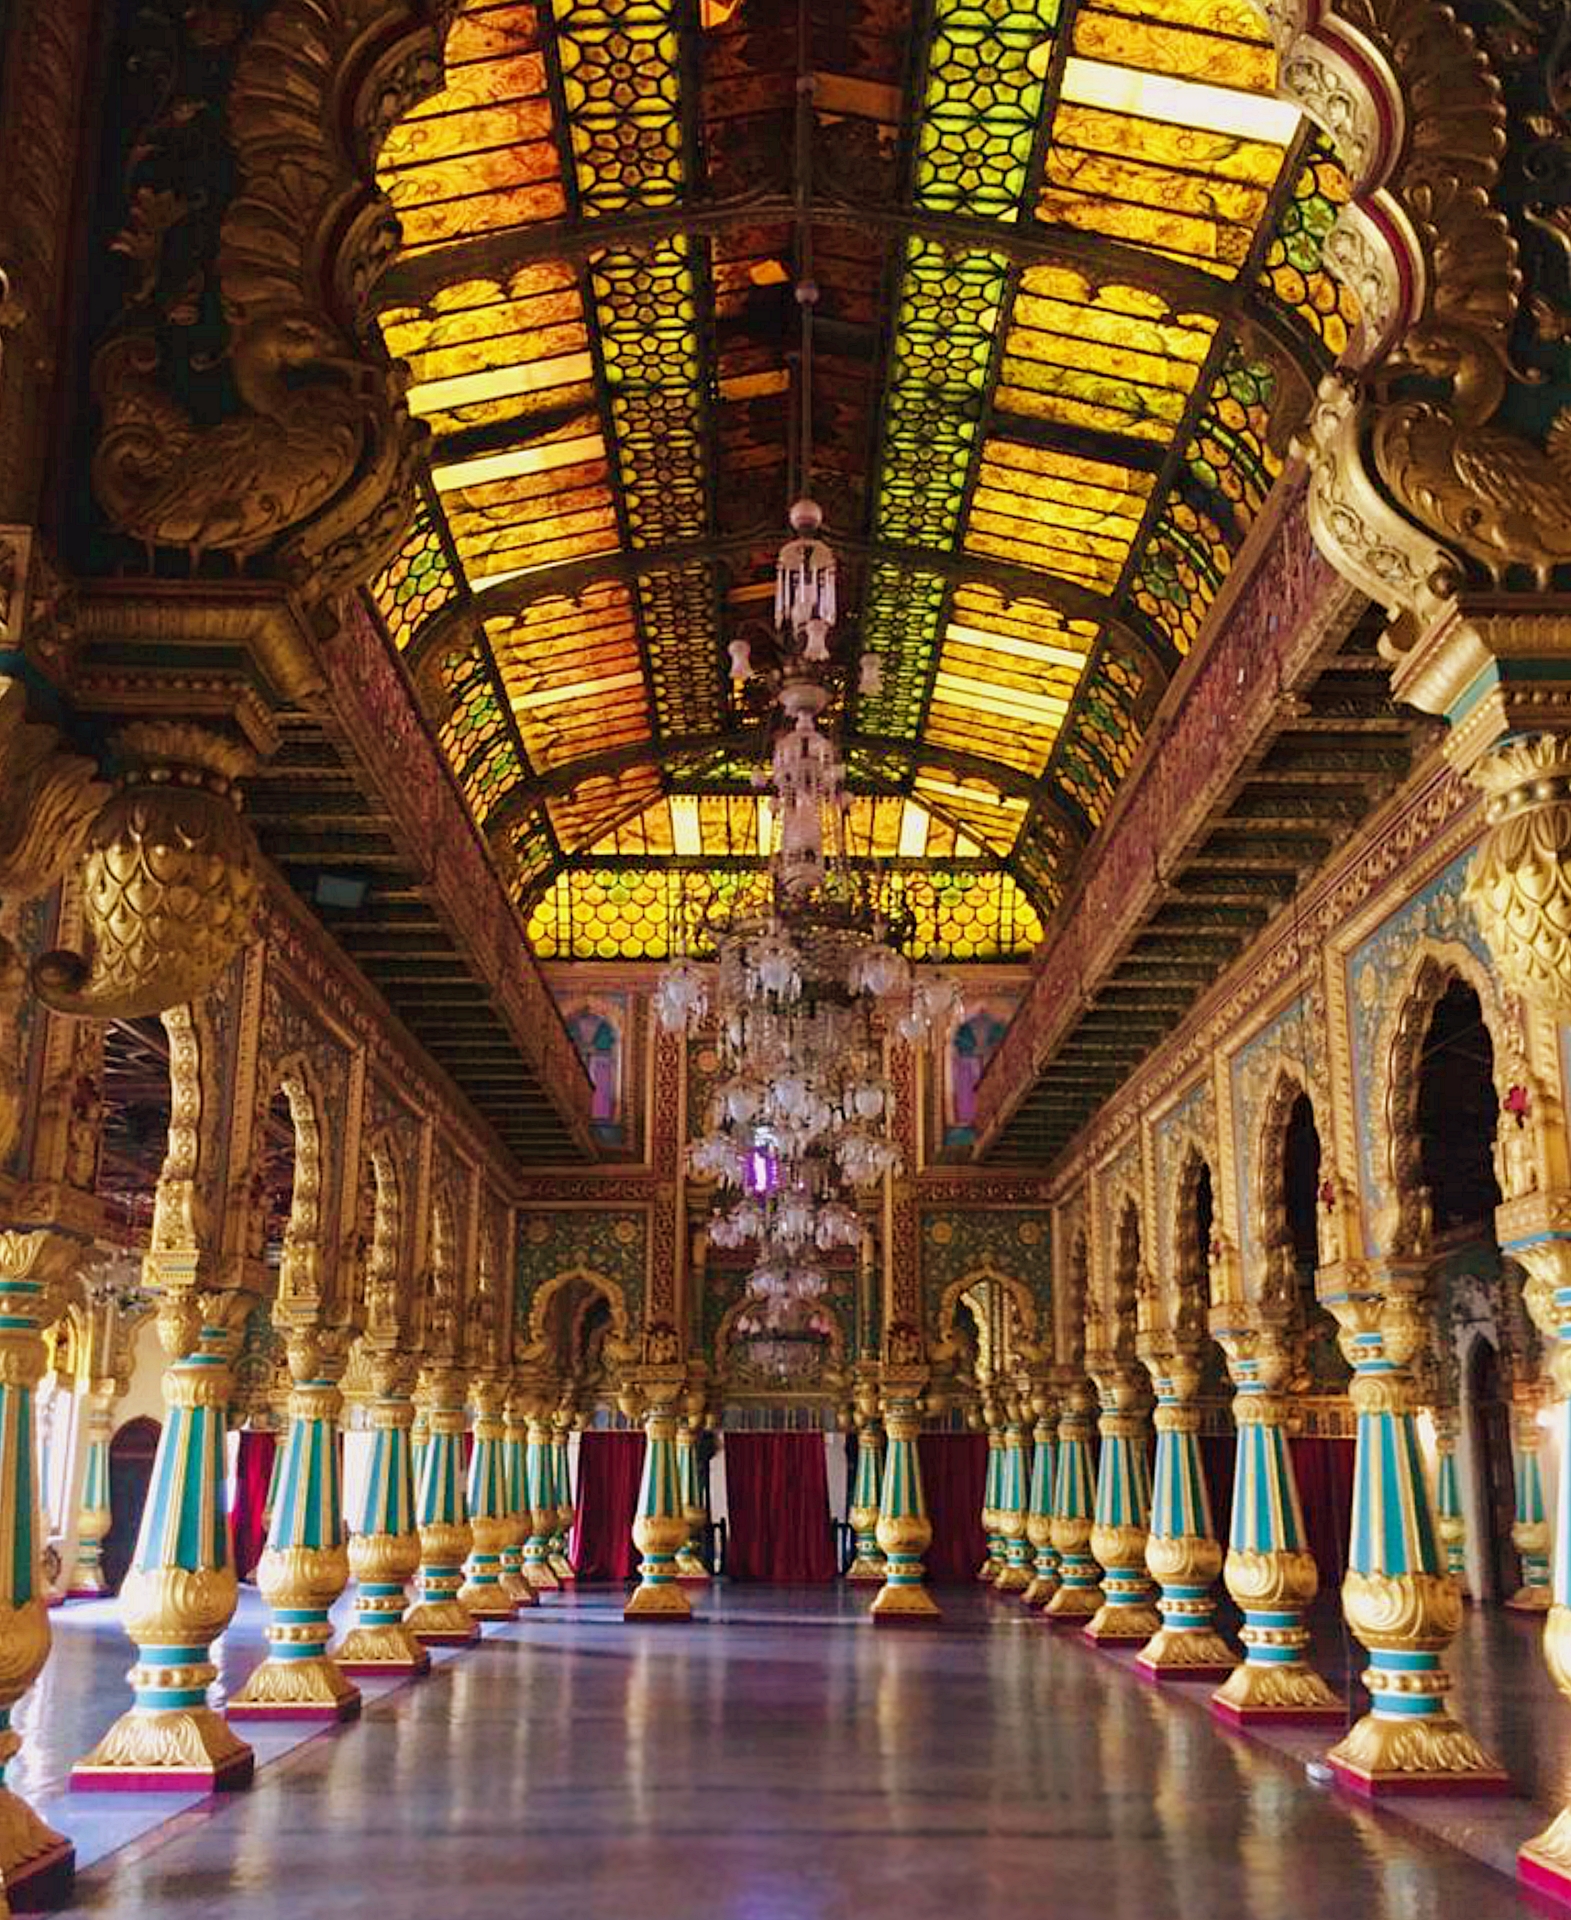 Mysore Palace: A Historically Significant Royal Residence